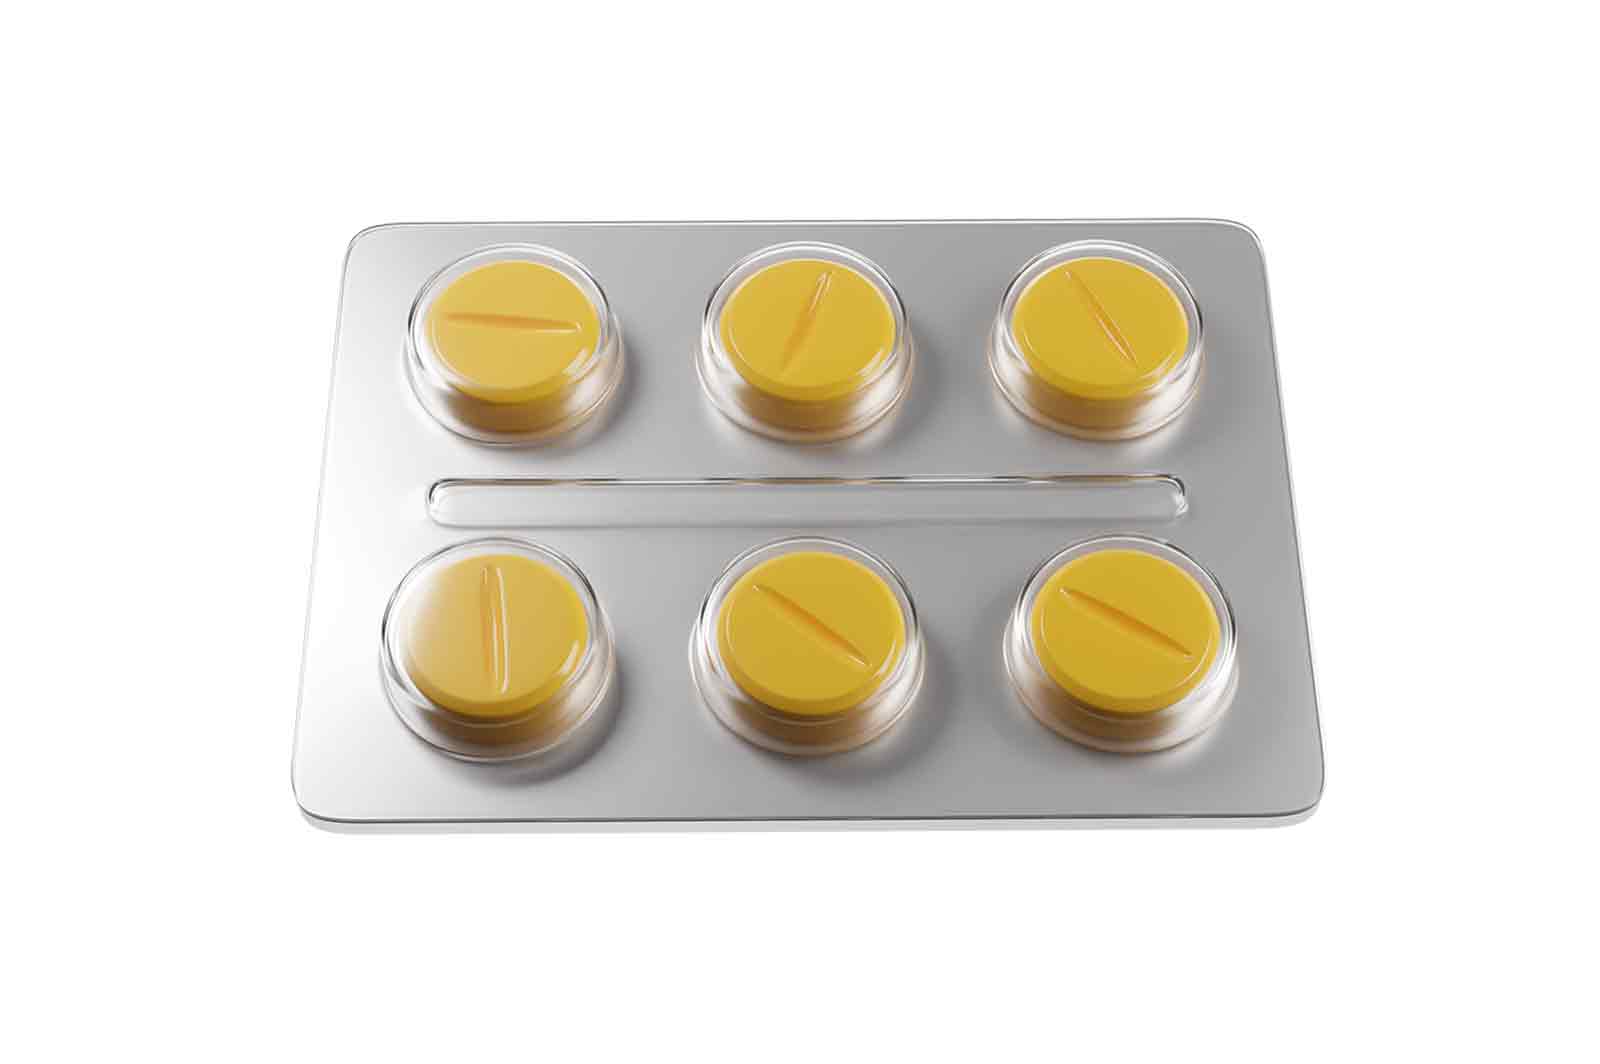 Blister pack of yellow pills, 3d rendered illustration. A convenient and hygienic way of packaging and dispensing oral medications.